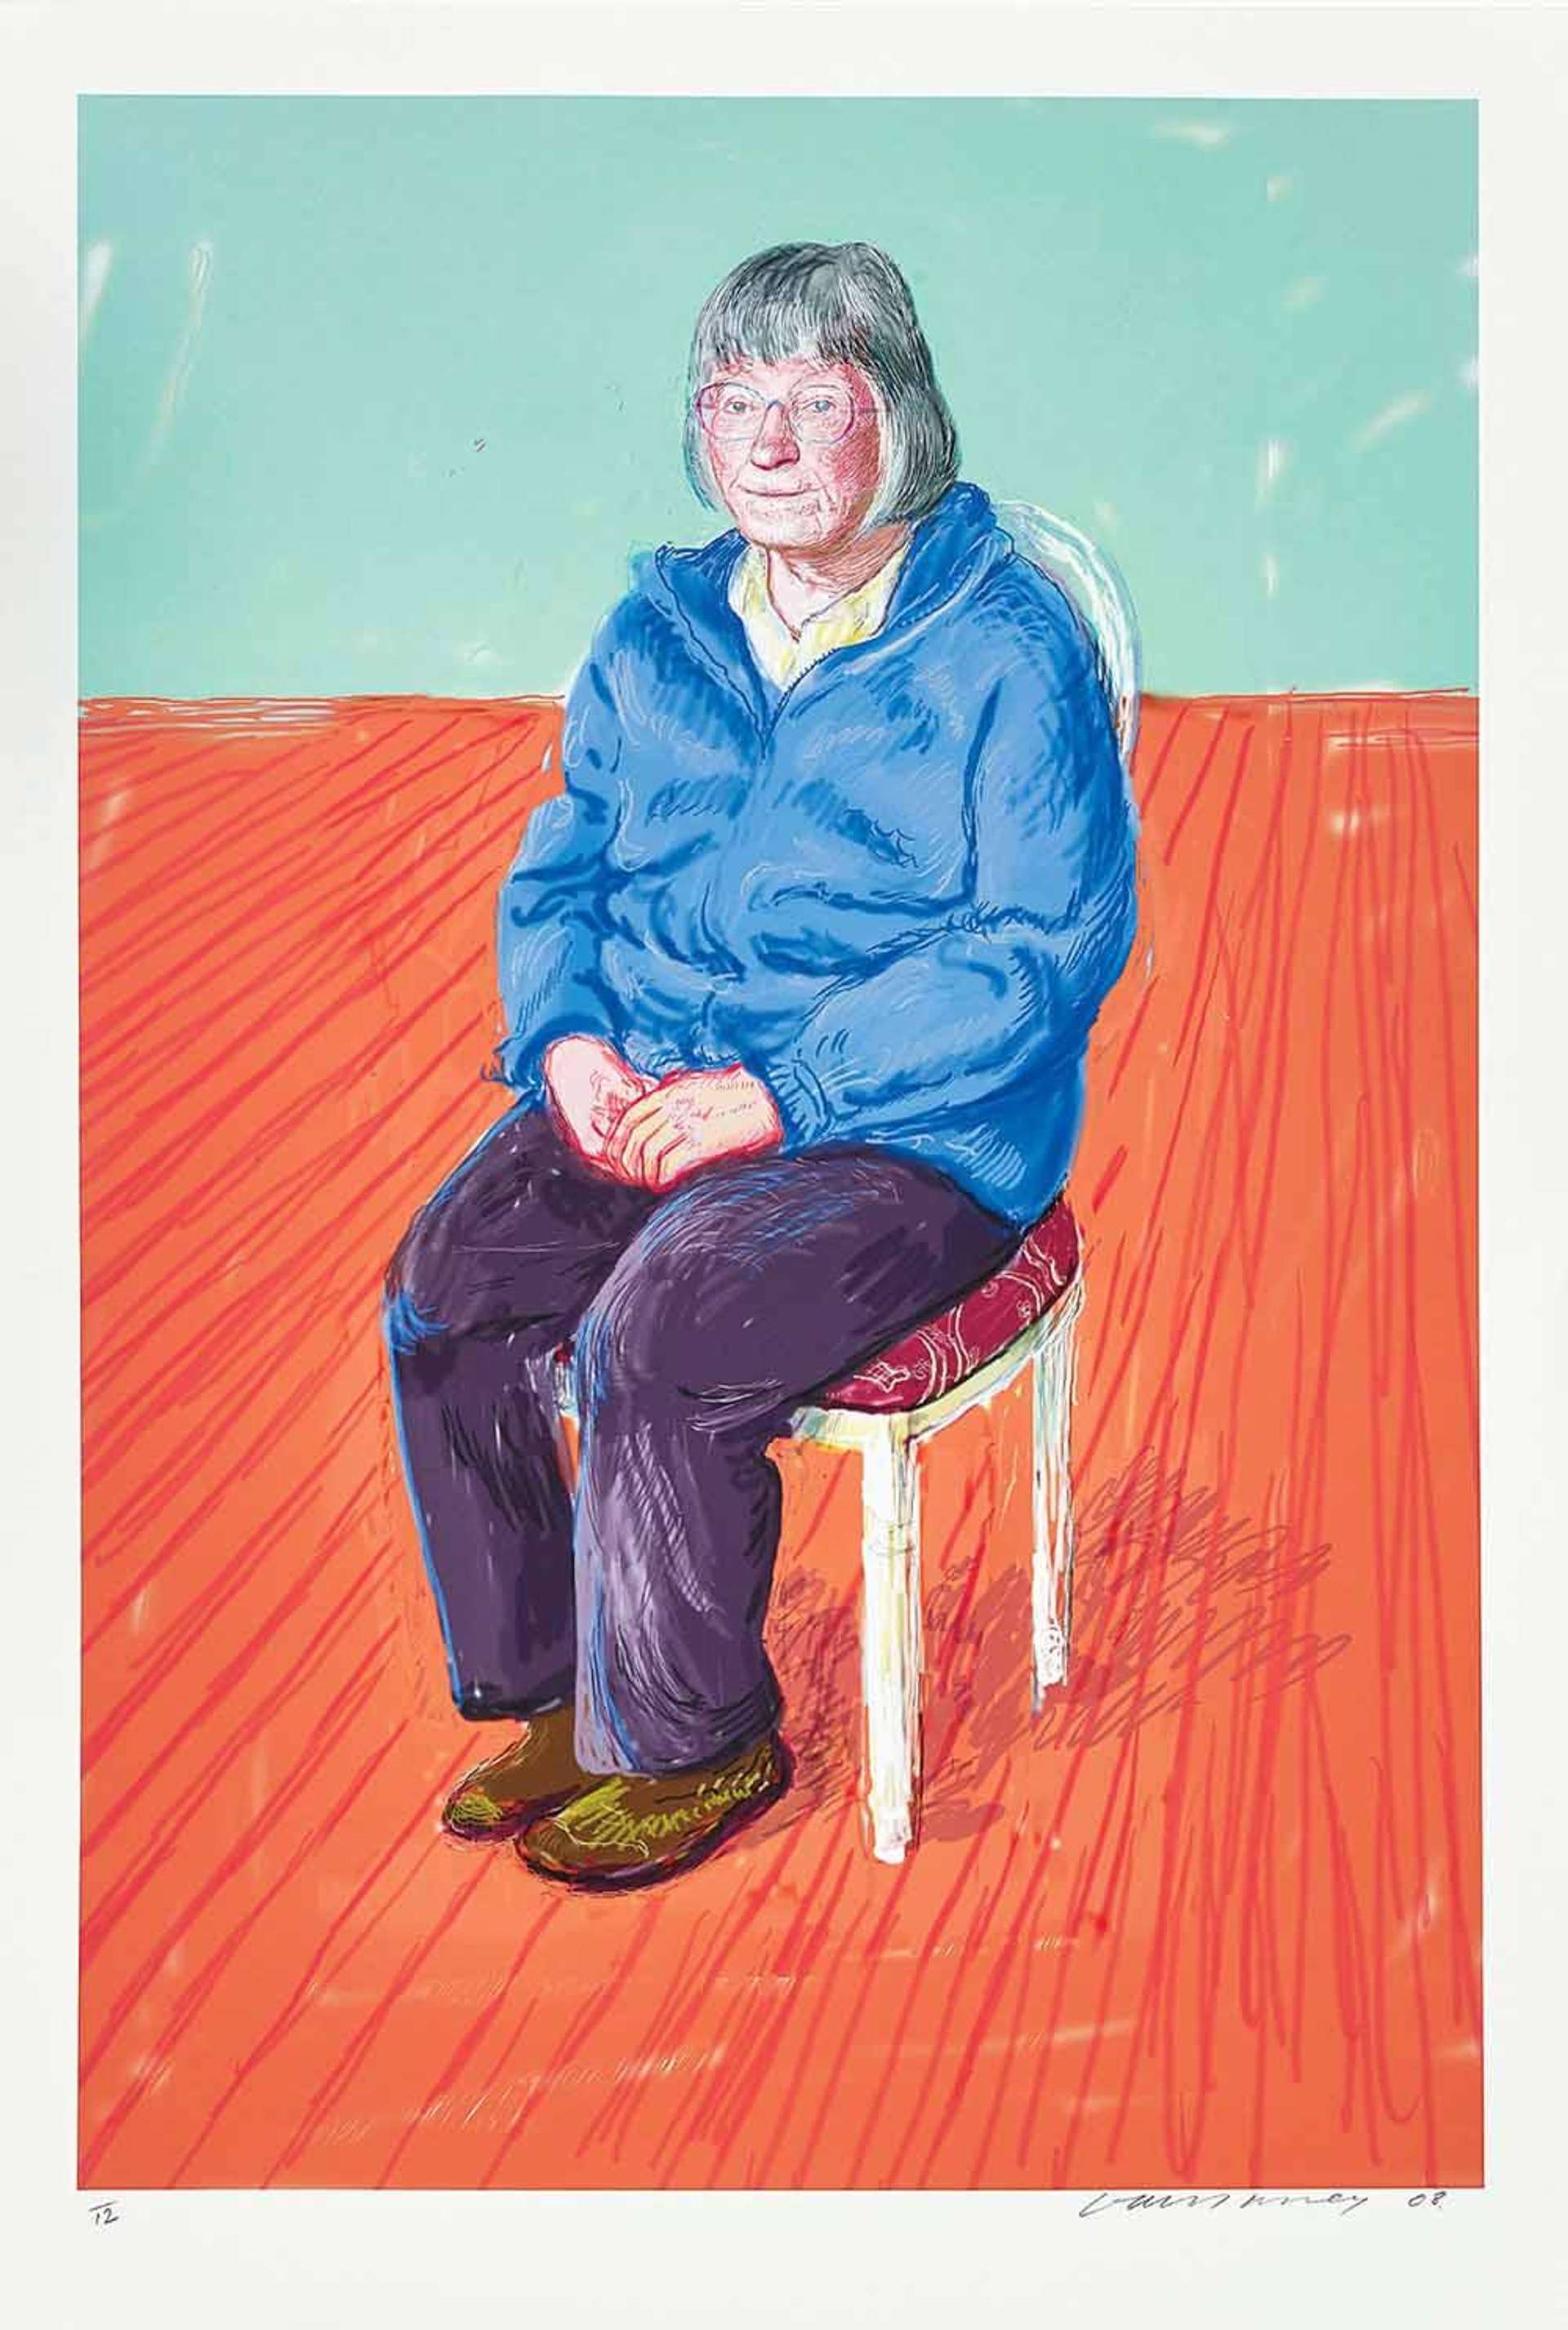 David Hockney’s Margaret Hockney. A digital print of Margaret Hockney, seated in a chair wearing a blue jacket and dark pants, in an interior setting with blue walls and hardwood floors.